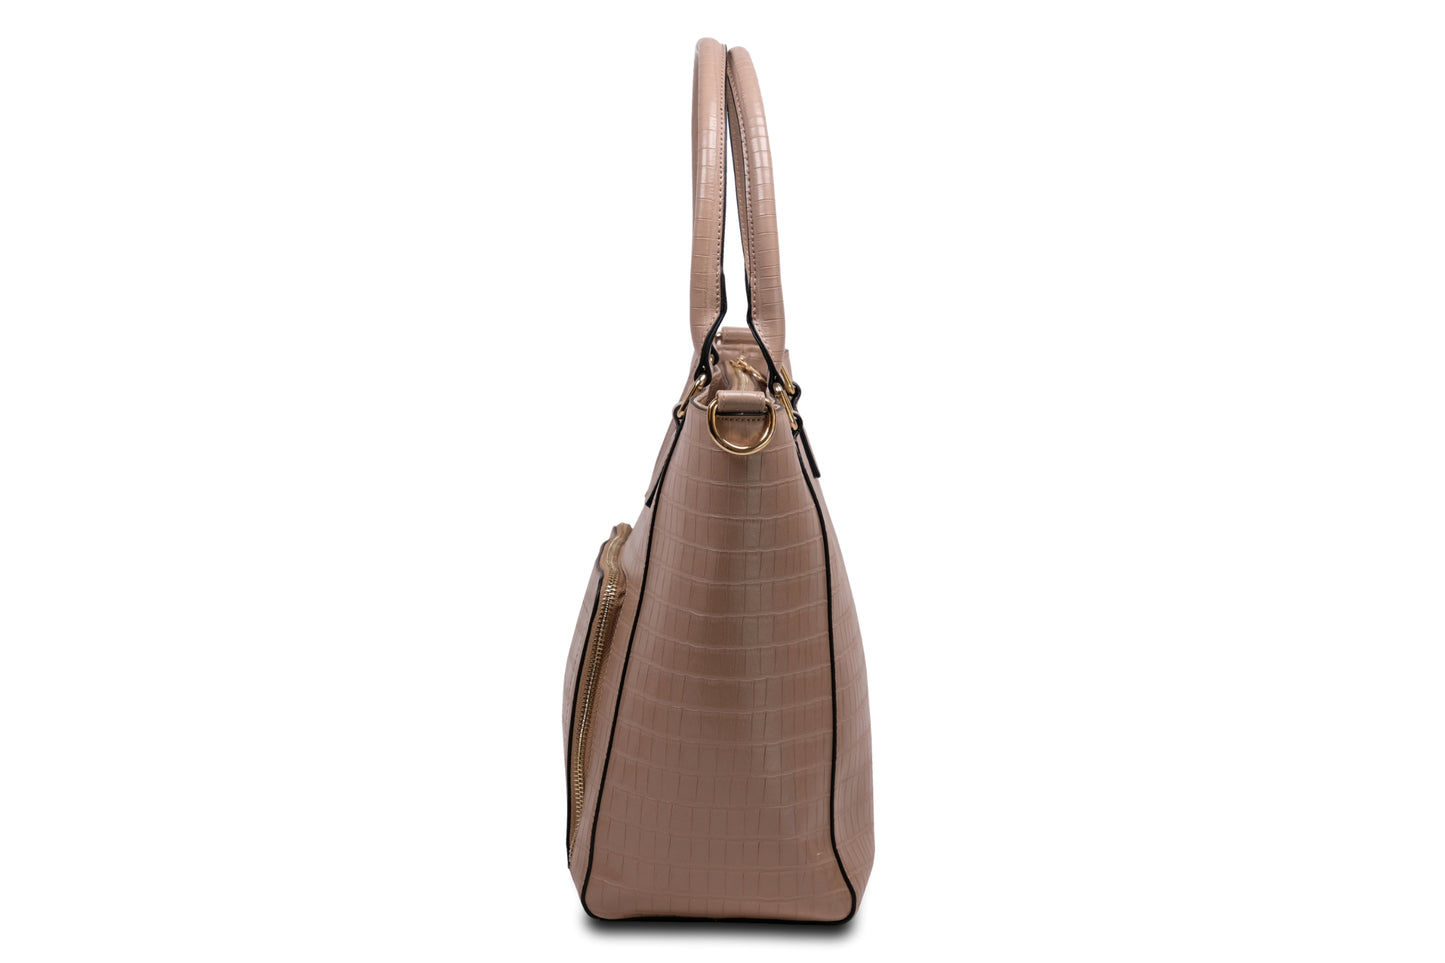 Tiara Faux Leather Light Brown Tote Bag Handbag made by Dewi Maya side view available at the best boutique in Upstate South Carolina Spartanburg Greenville Dewi Maya Boutique